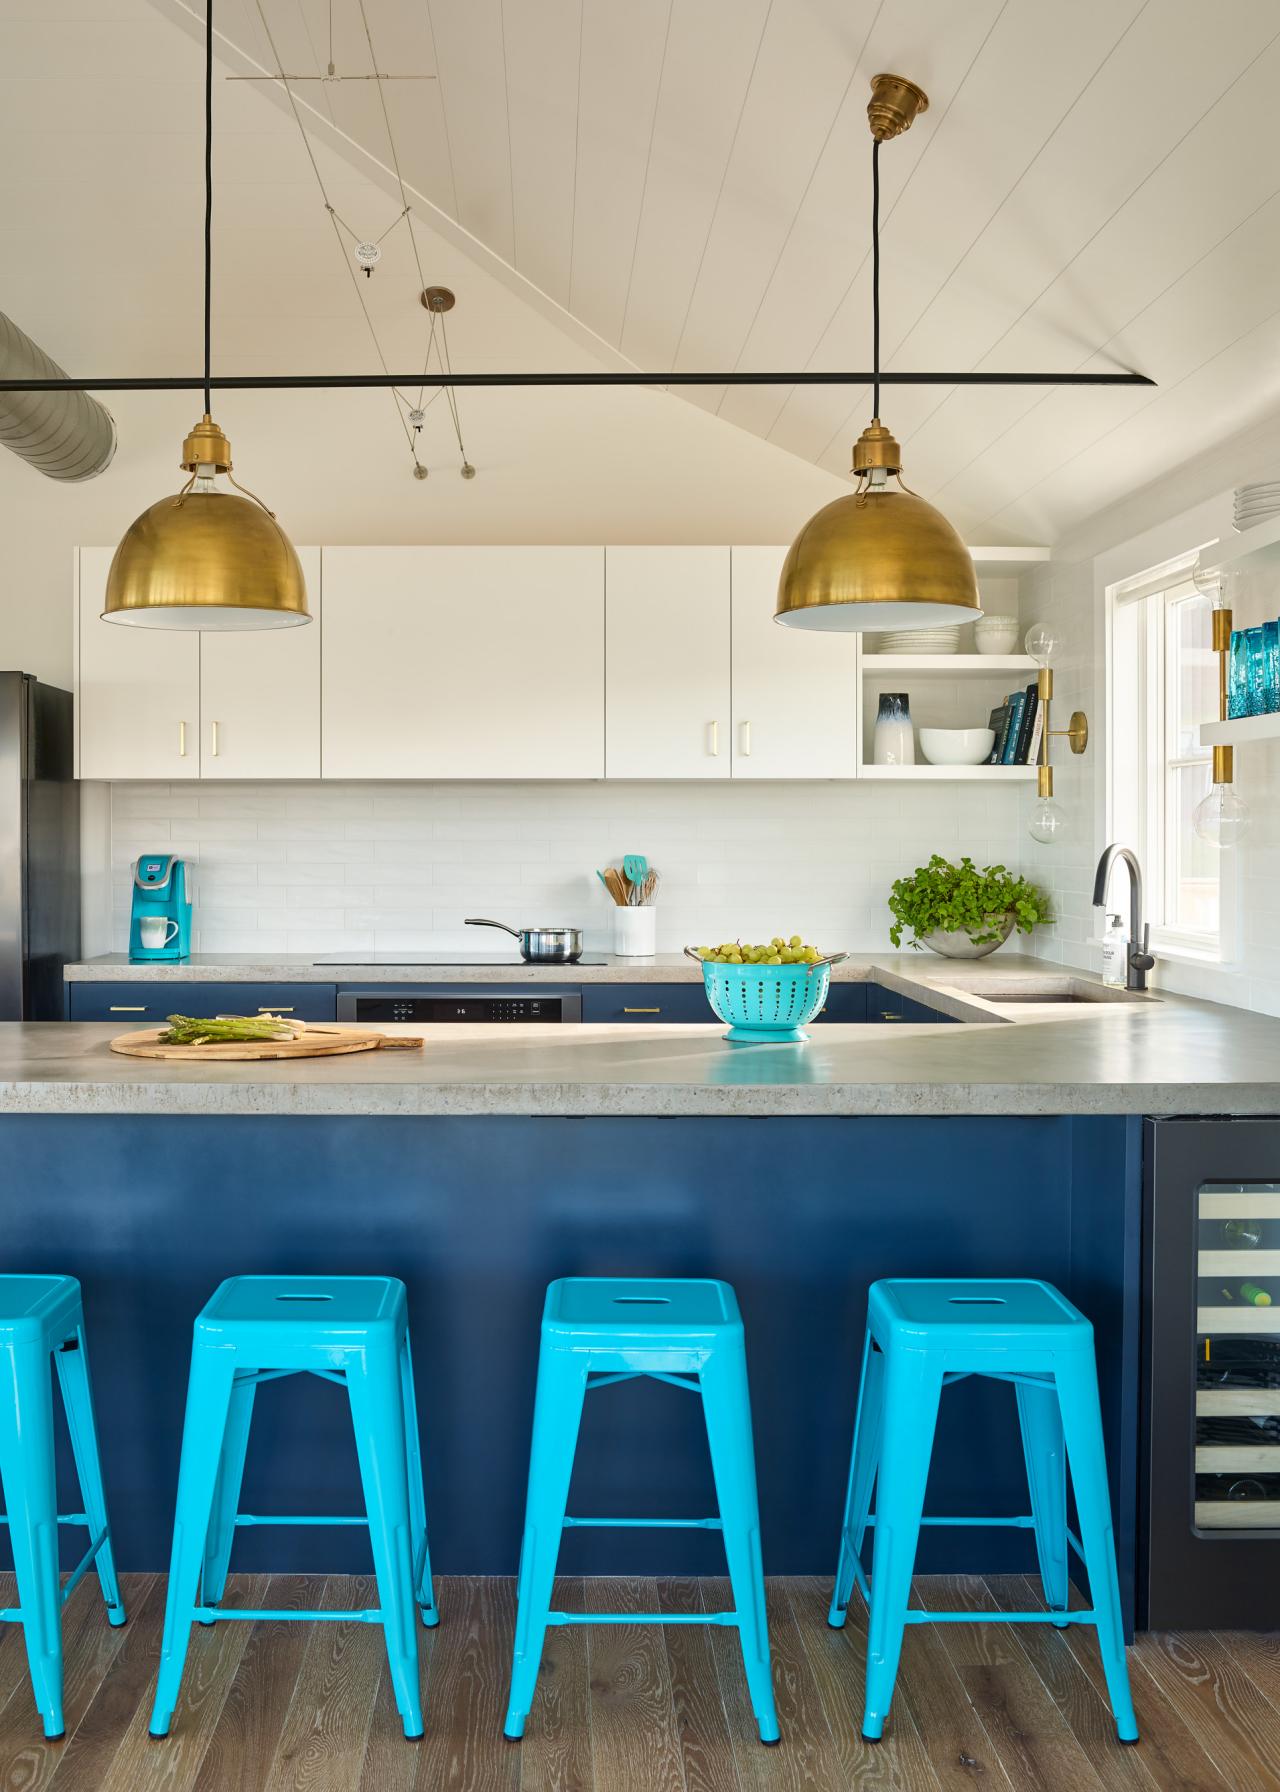 Modern Coastal Kitchen With Concrete Countertops And Turquoise